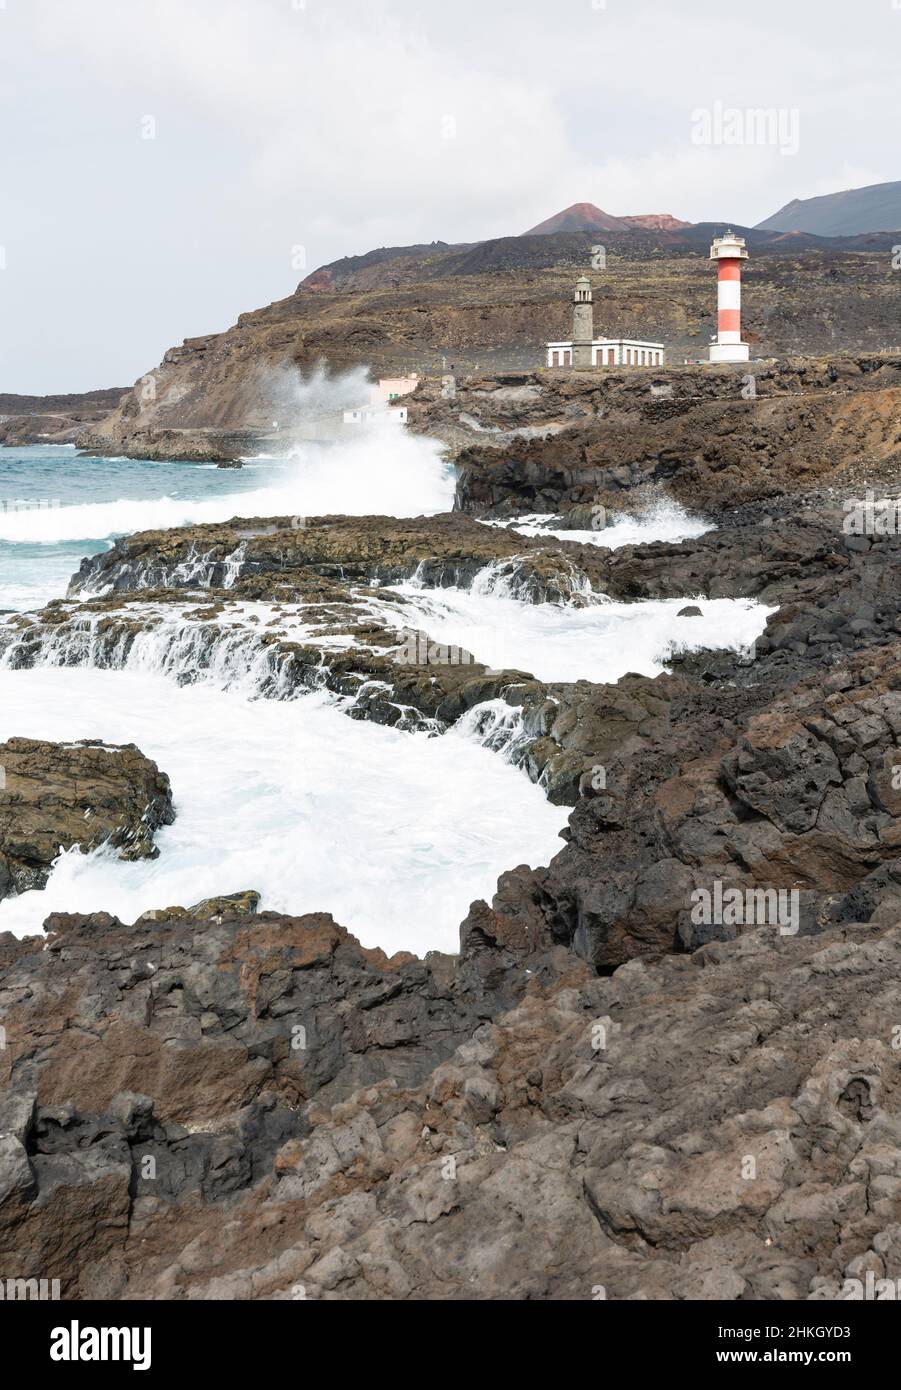 The two lighthouses in Fuencaliente, La Palma, Spain with tall waves on the rocks. Stock Photo